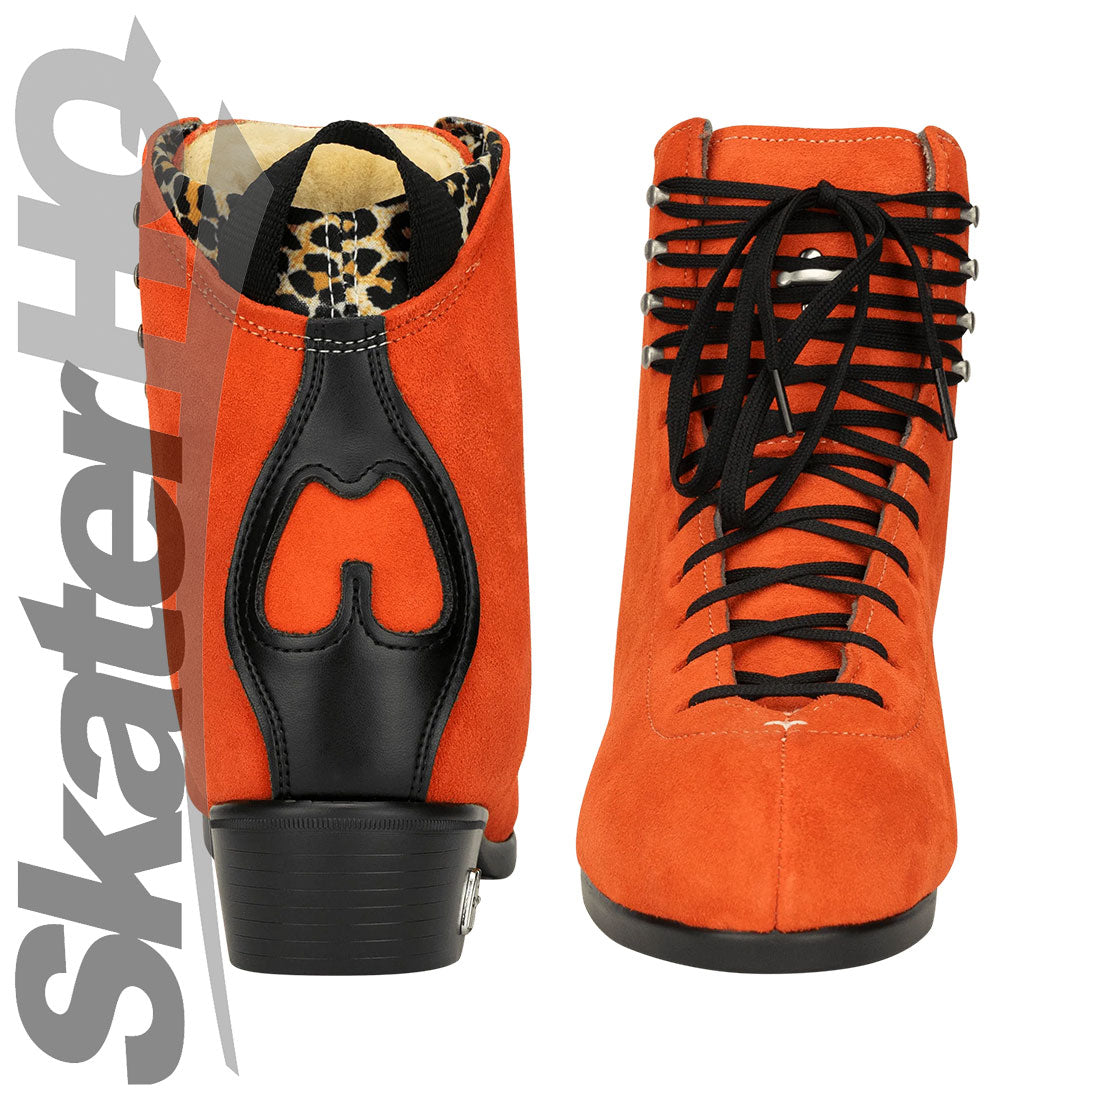 Moxi Jack 2 Boot - Special - Clementine Roller Skate Boots